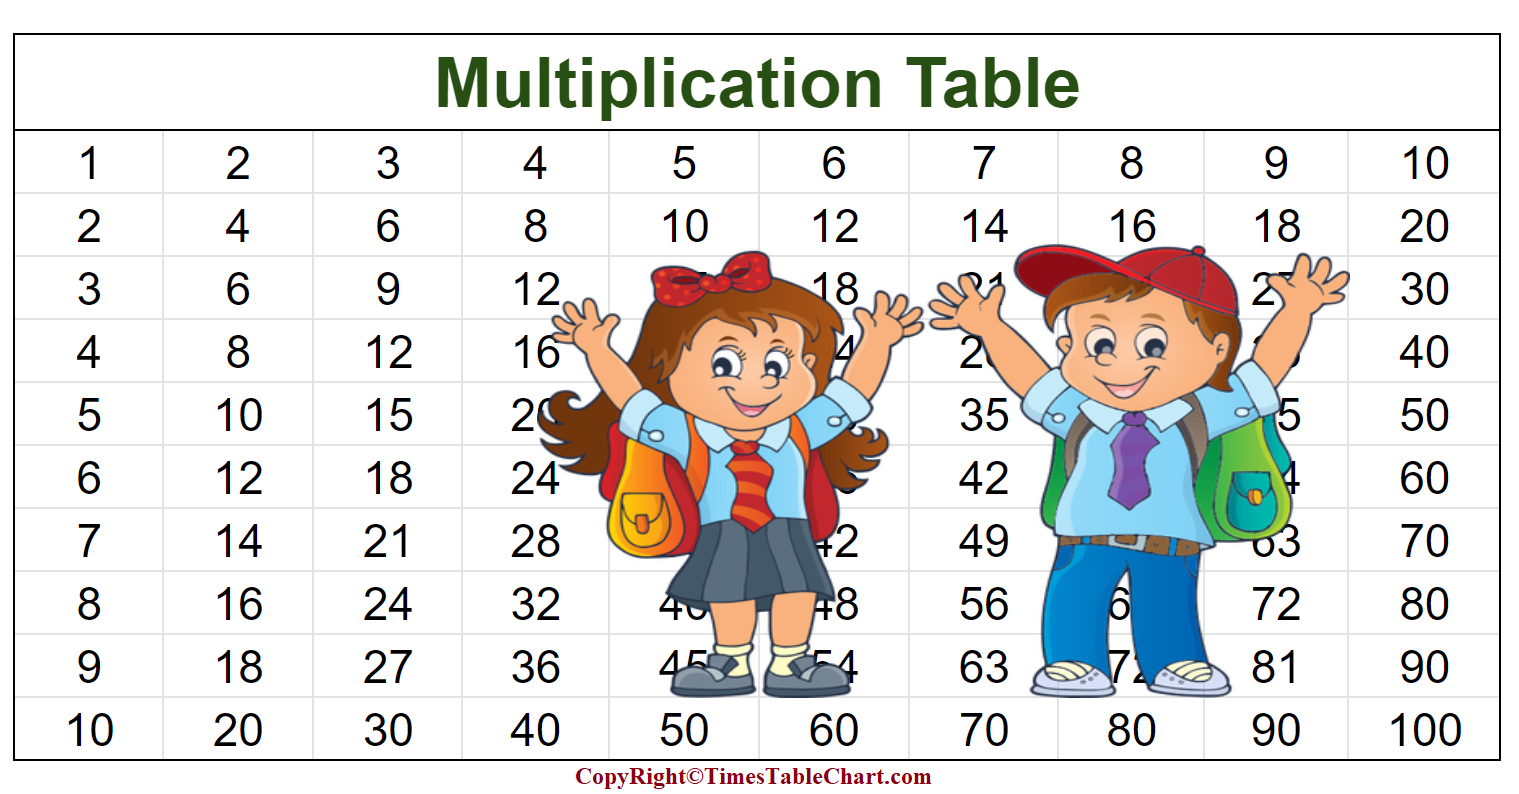 Multiplication Table Game